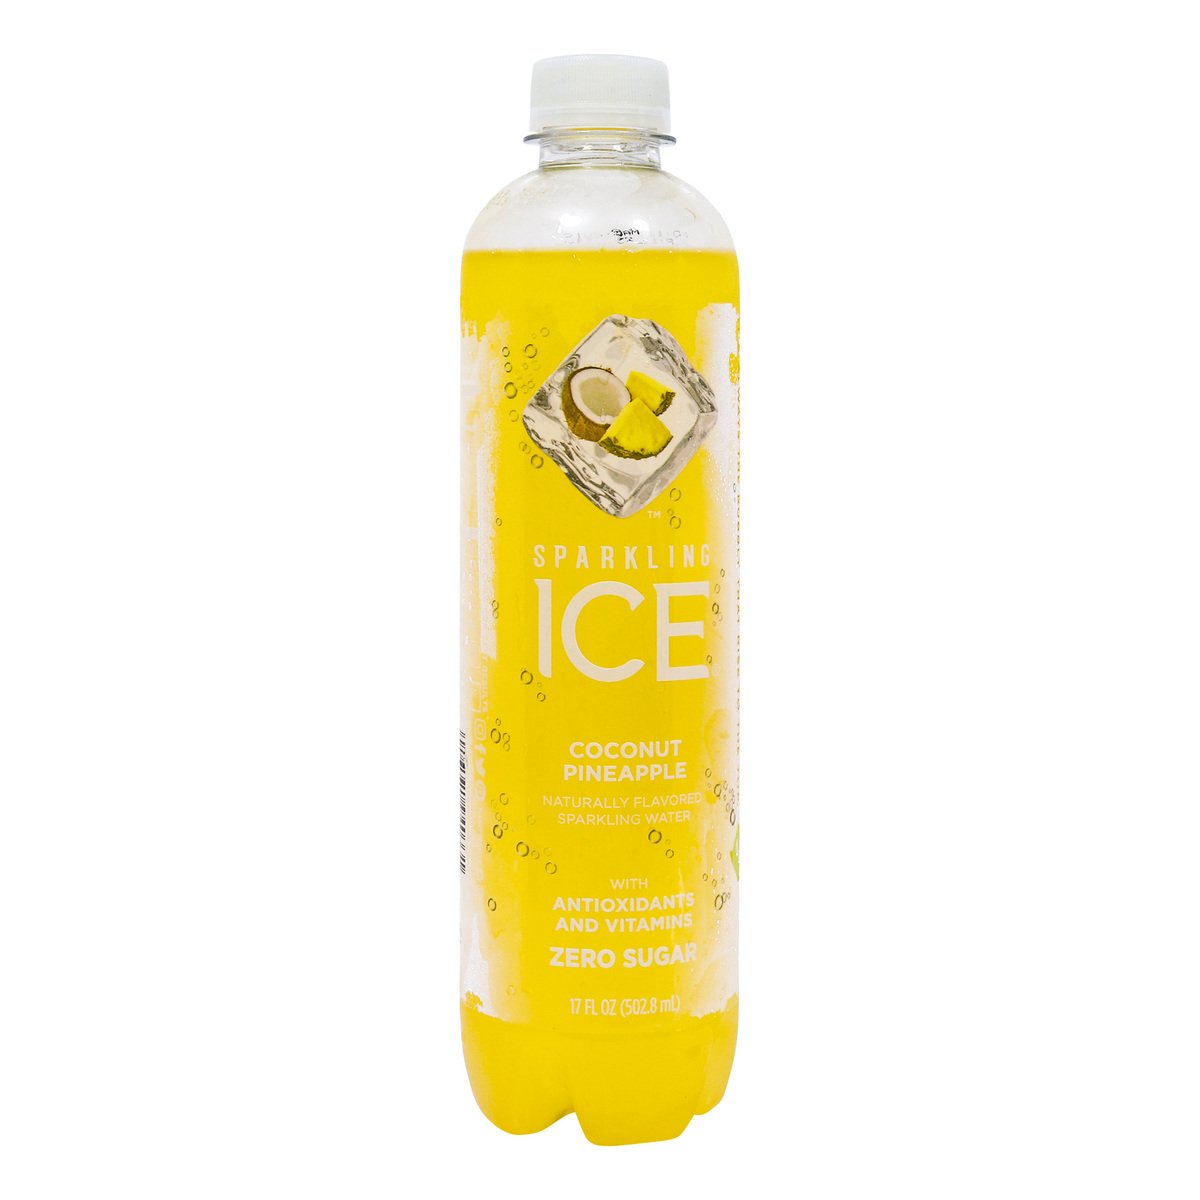 Ice Coconut Pineapple Naturally Flavored Sparkling Water 502.8 ml